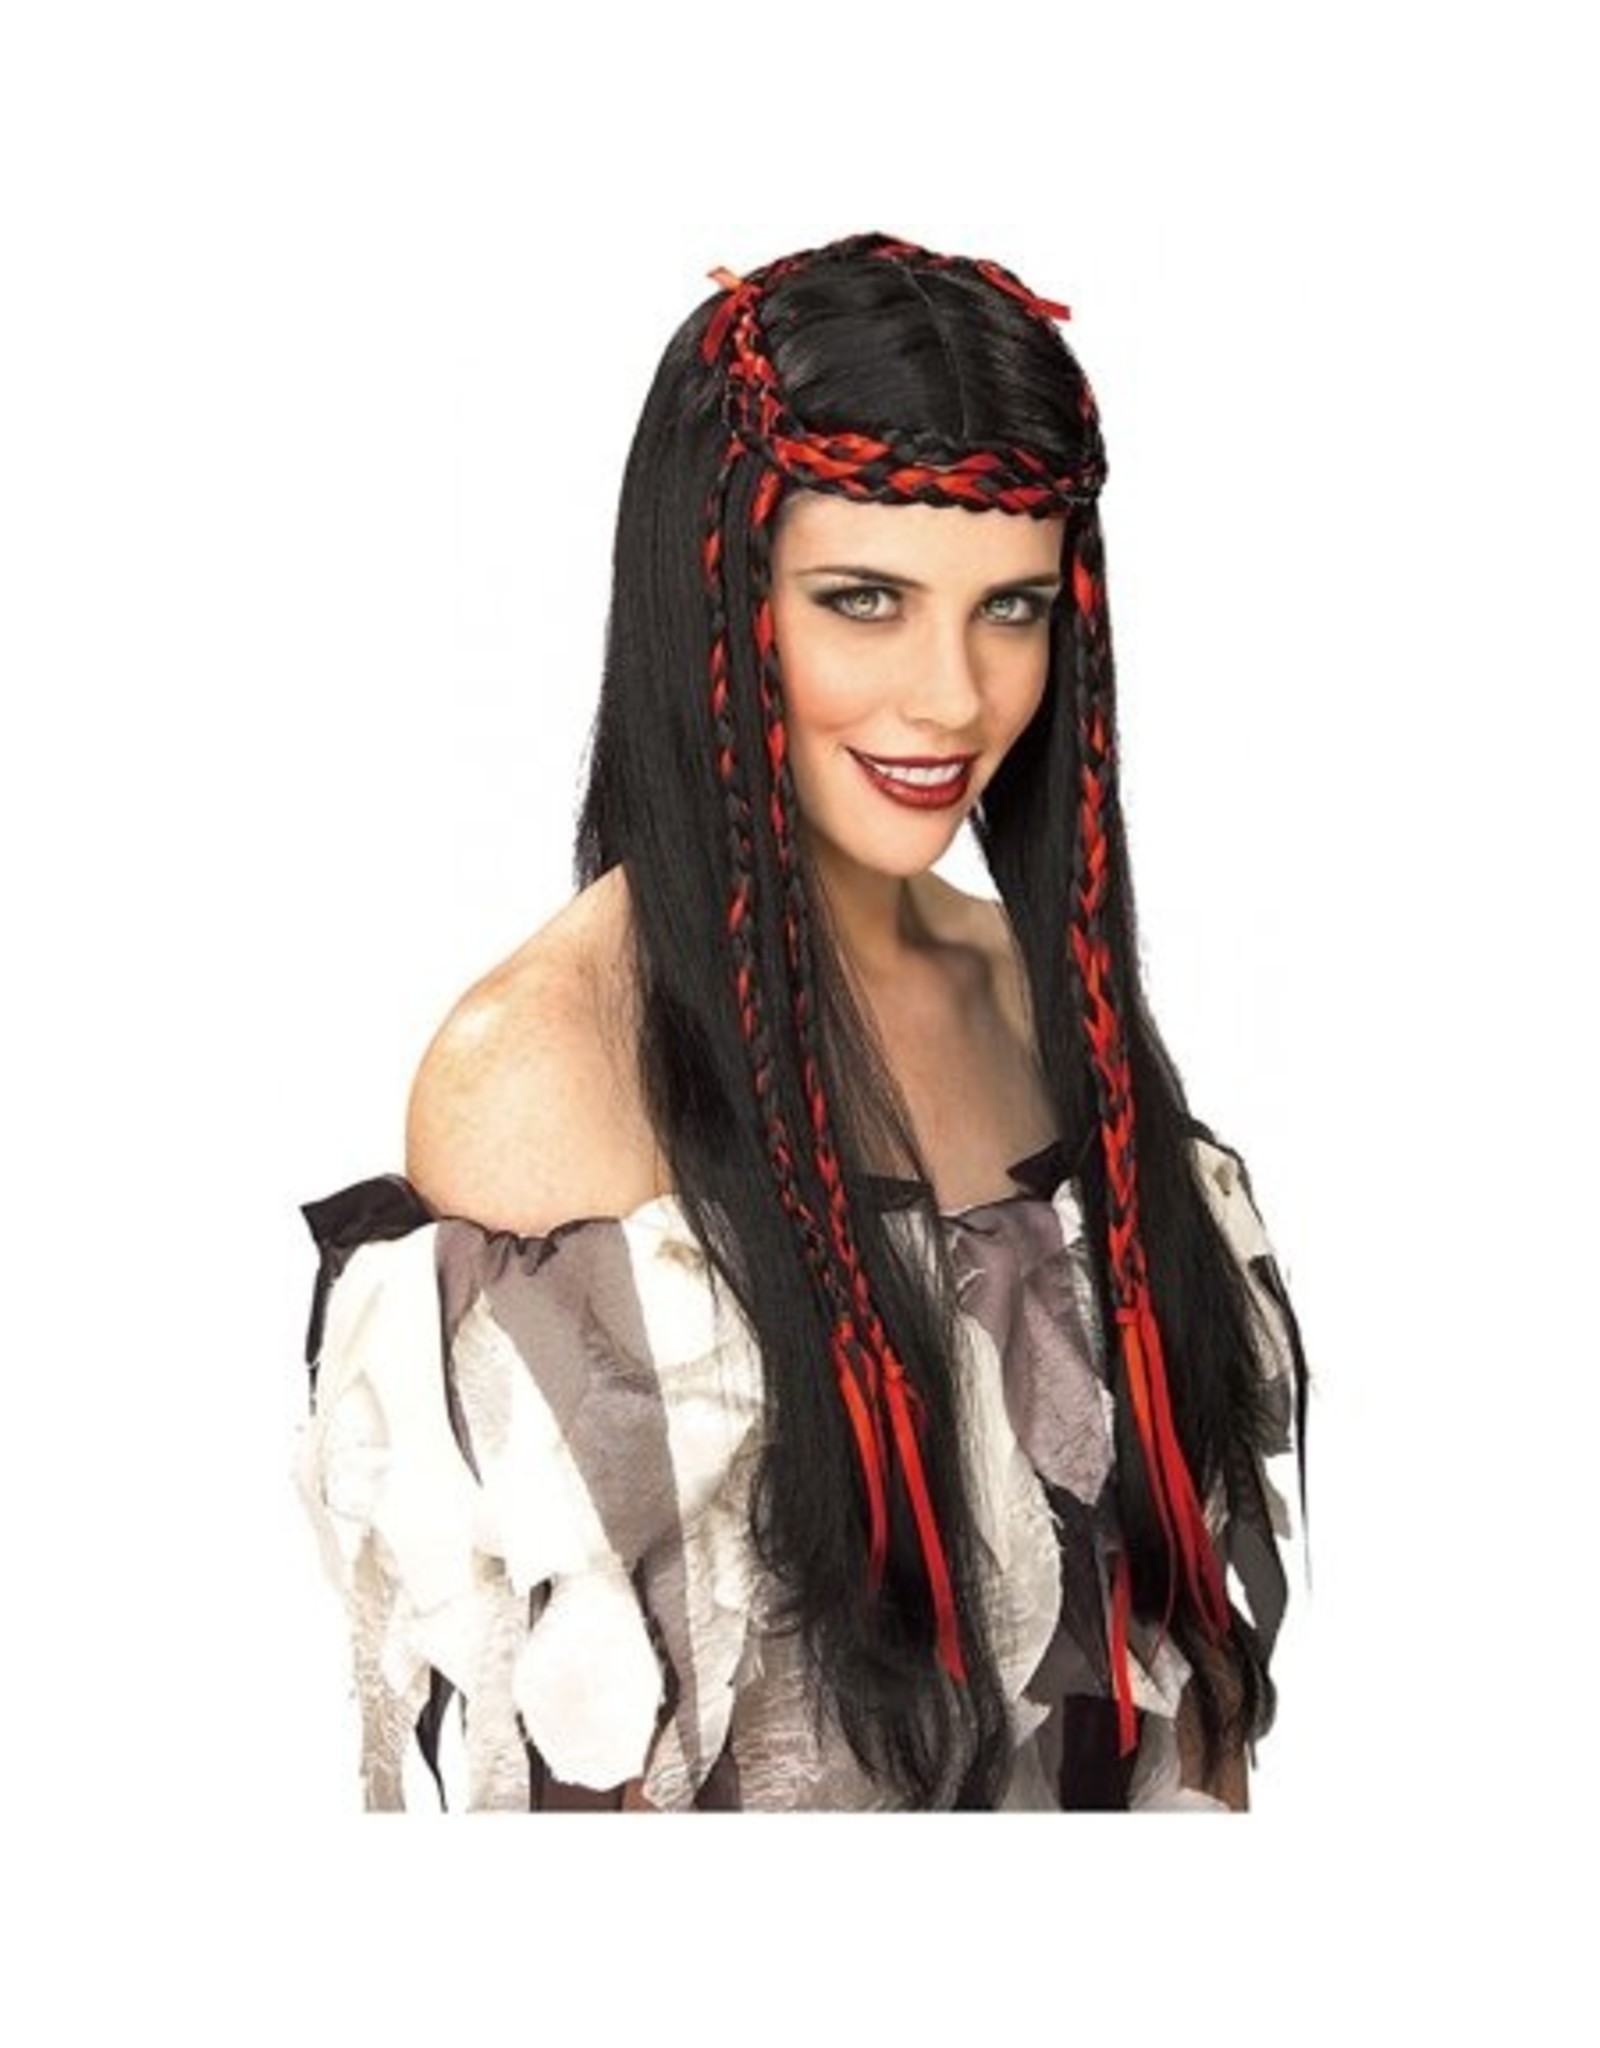 Rubie's Costumes Maiden Princess Wig with Braids, Black/Red, One Size